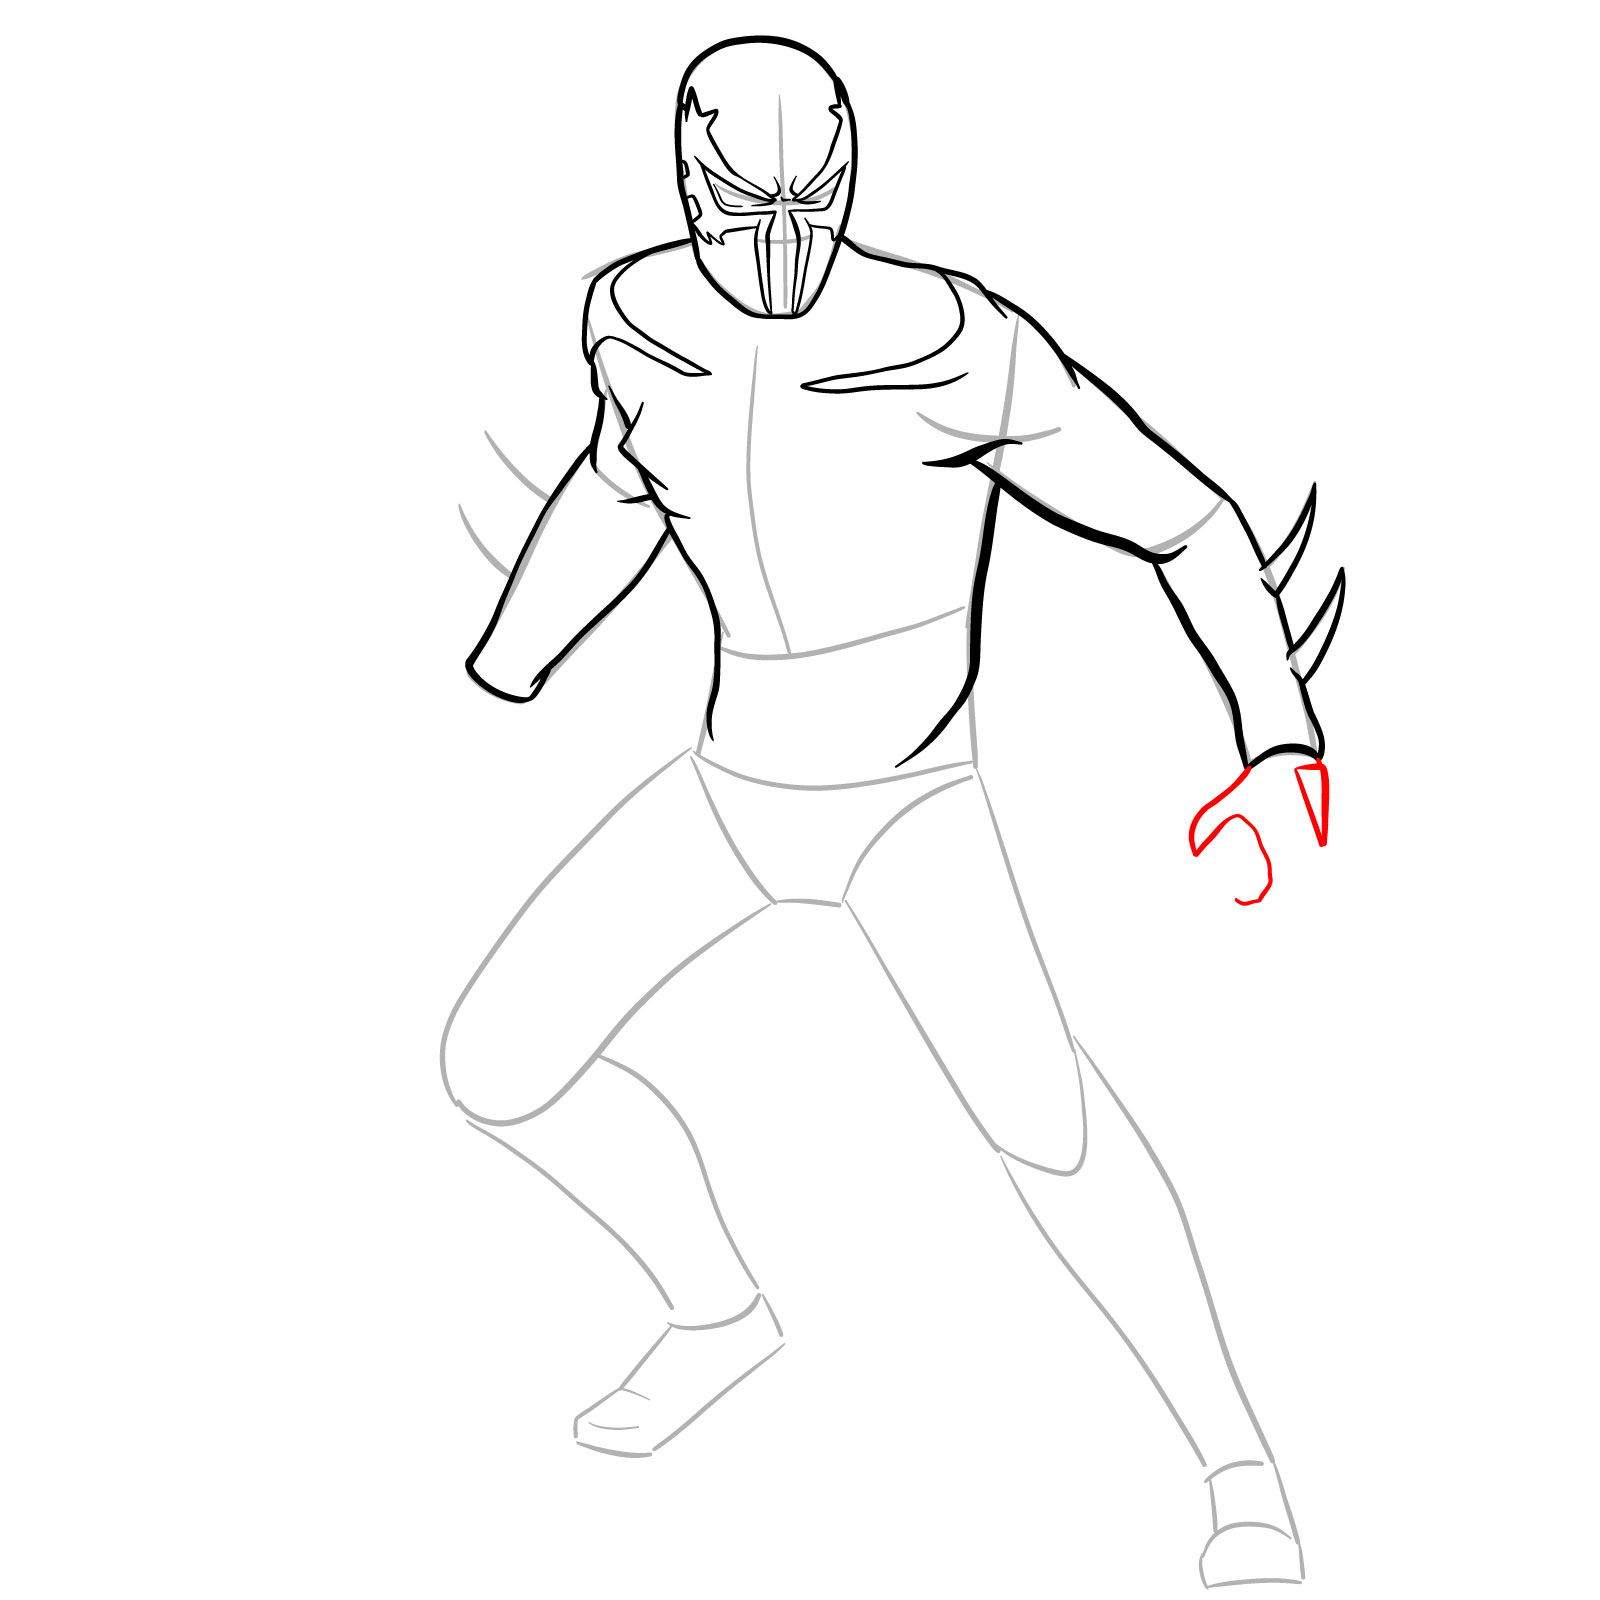 How to draw Spider-Man 2099 - step 18